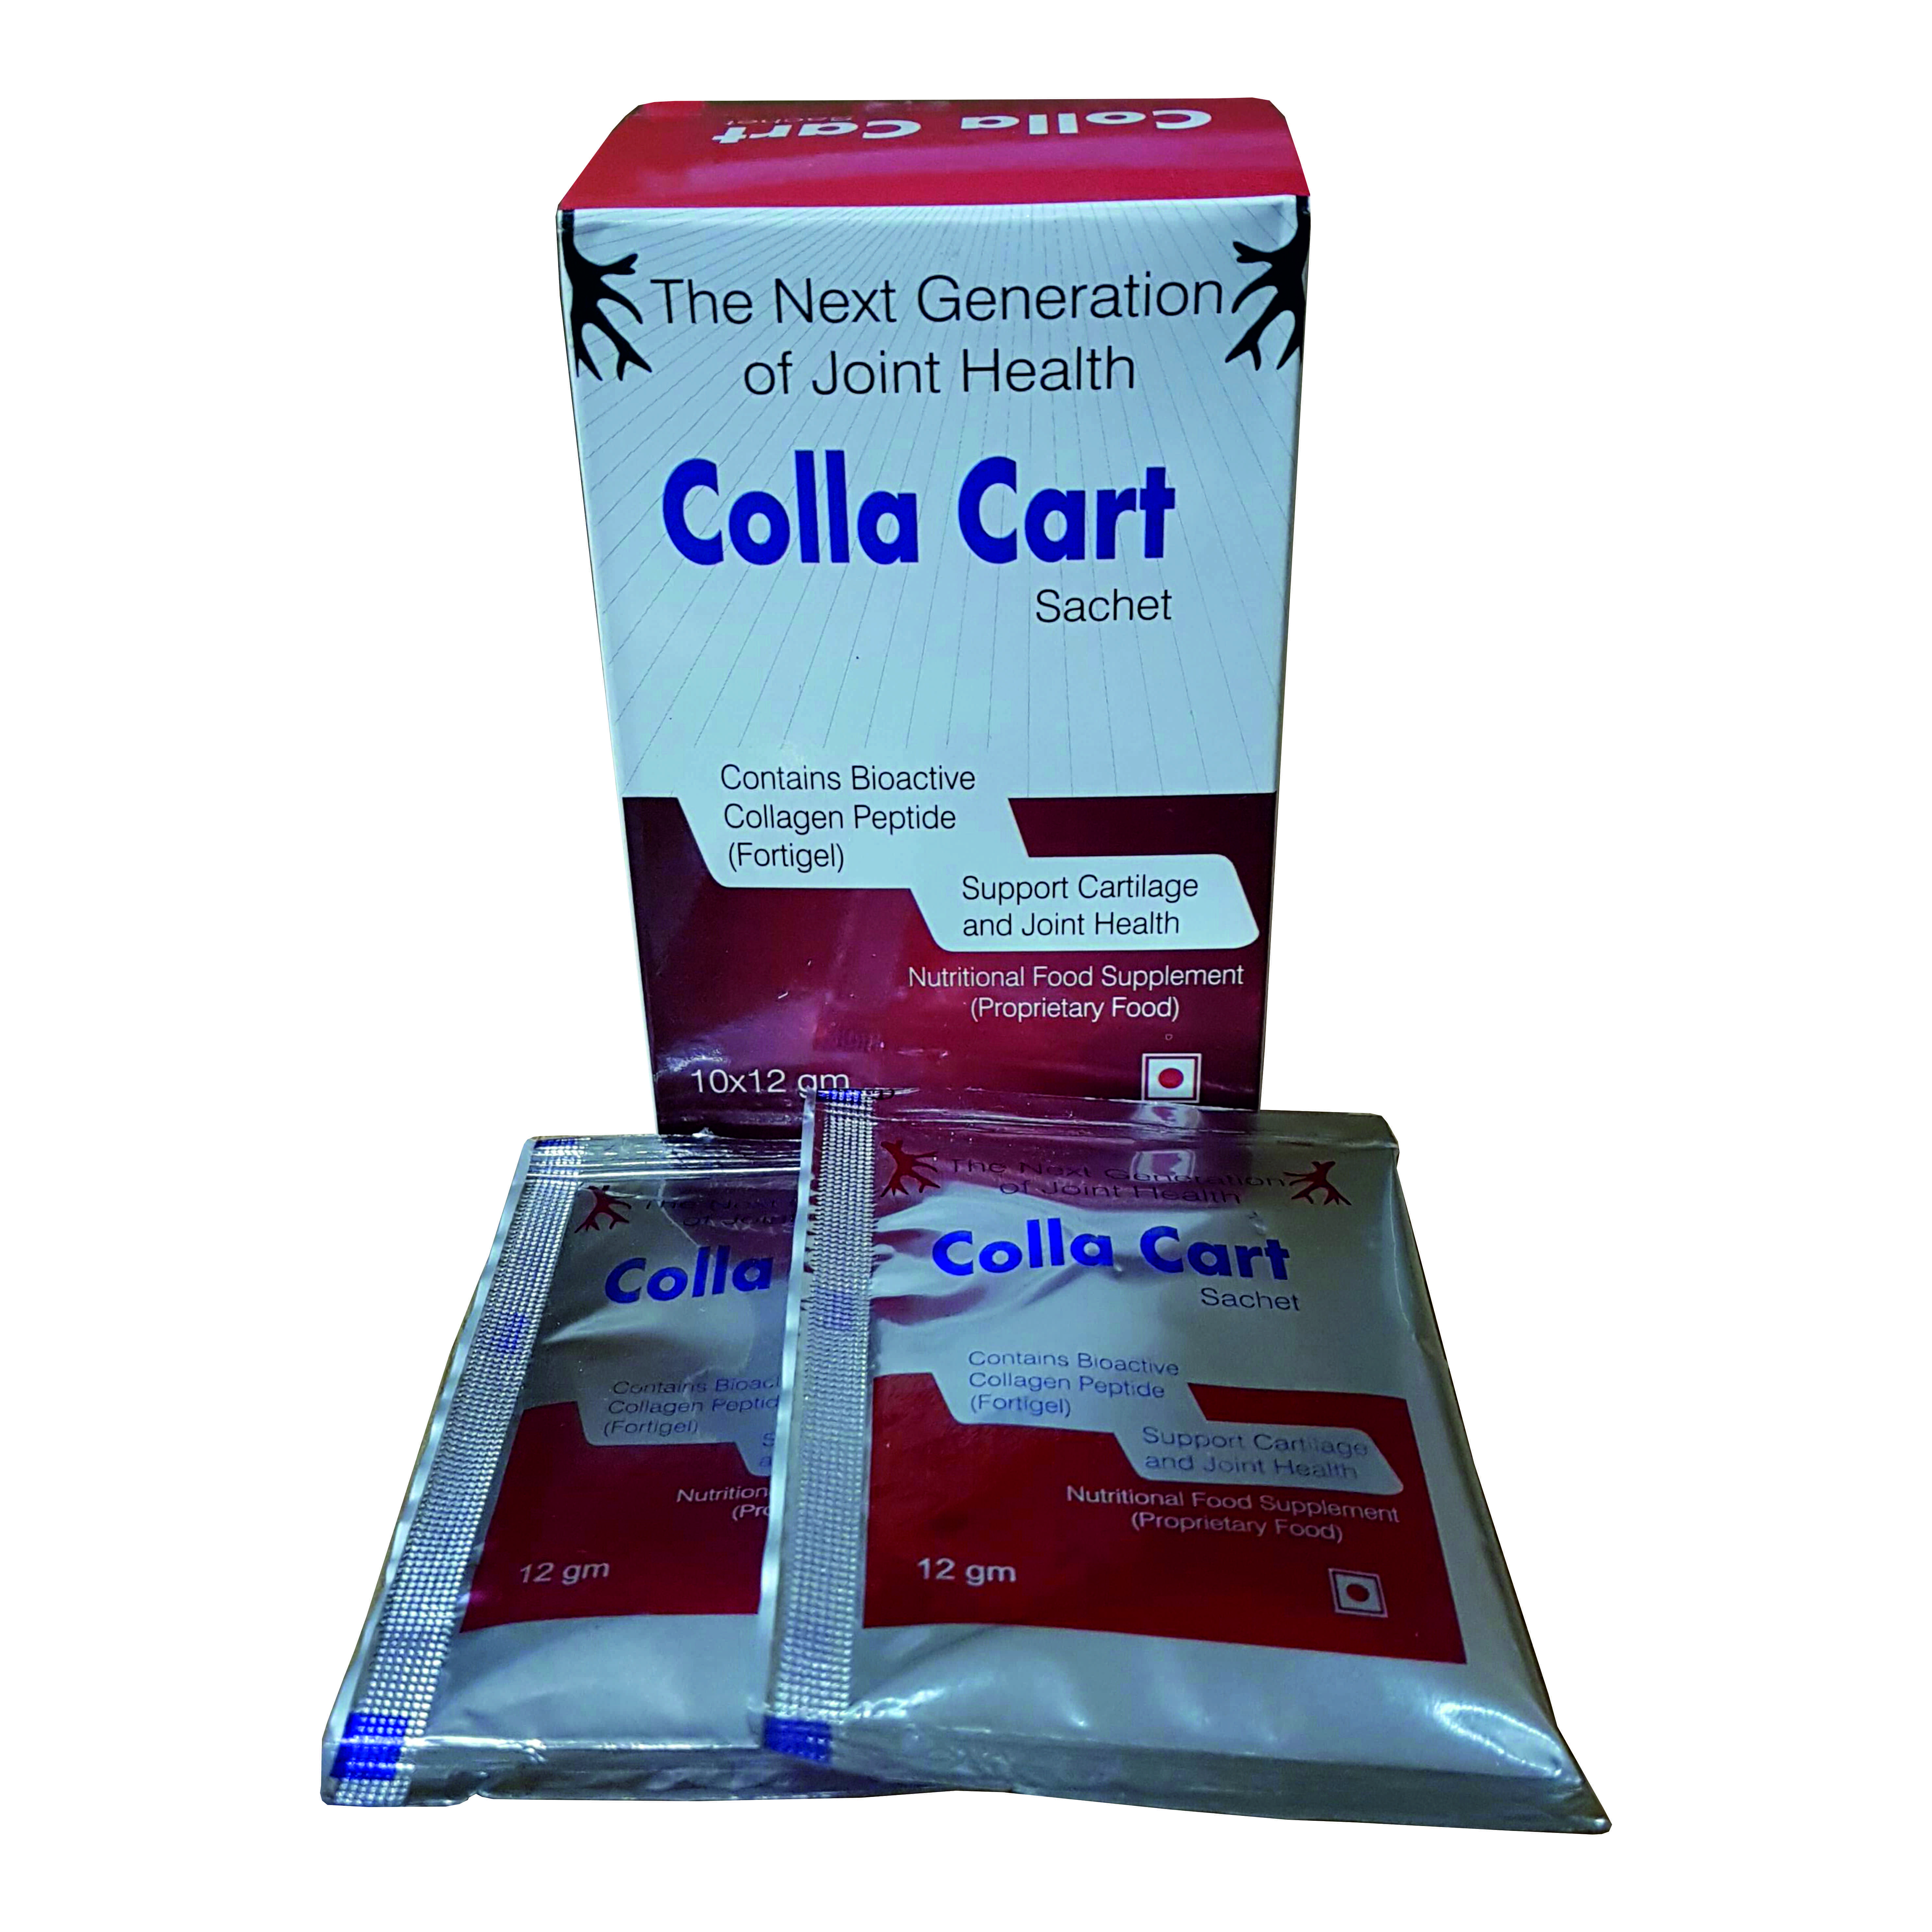 each 12g contains: bioactive collagen peptide 10 gm;
glucosomine 750 mg; methylcobalamin 1500 mg